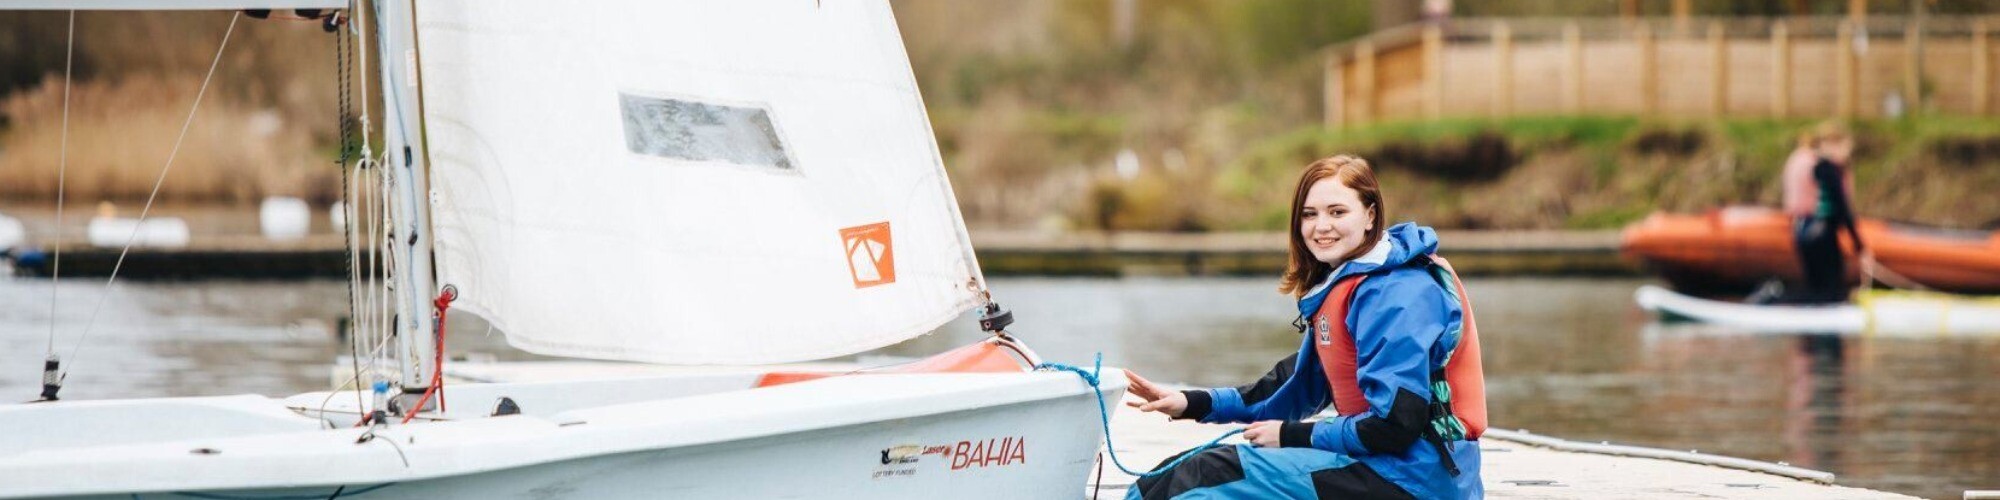 NEW Children's experiences and youth sailing workshops days